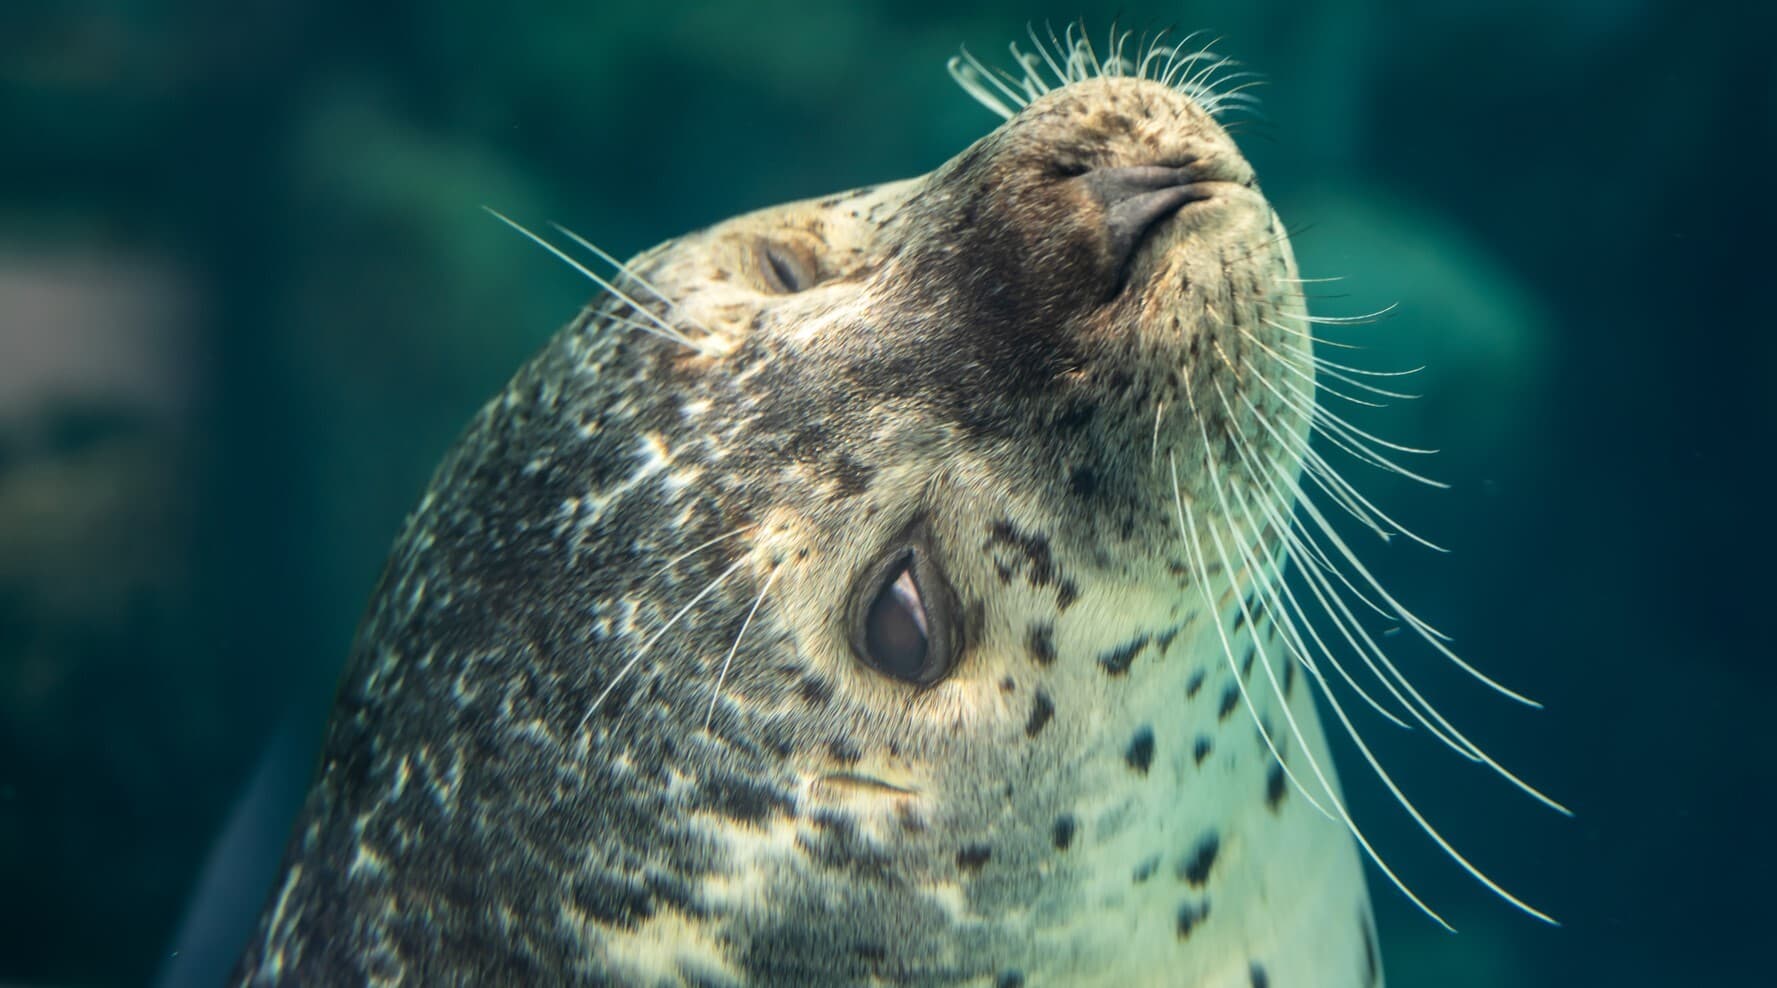 A harbor seal underwater looks back at the camera and winks.